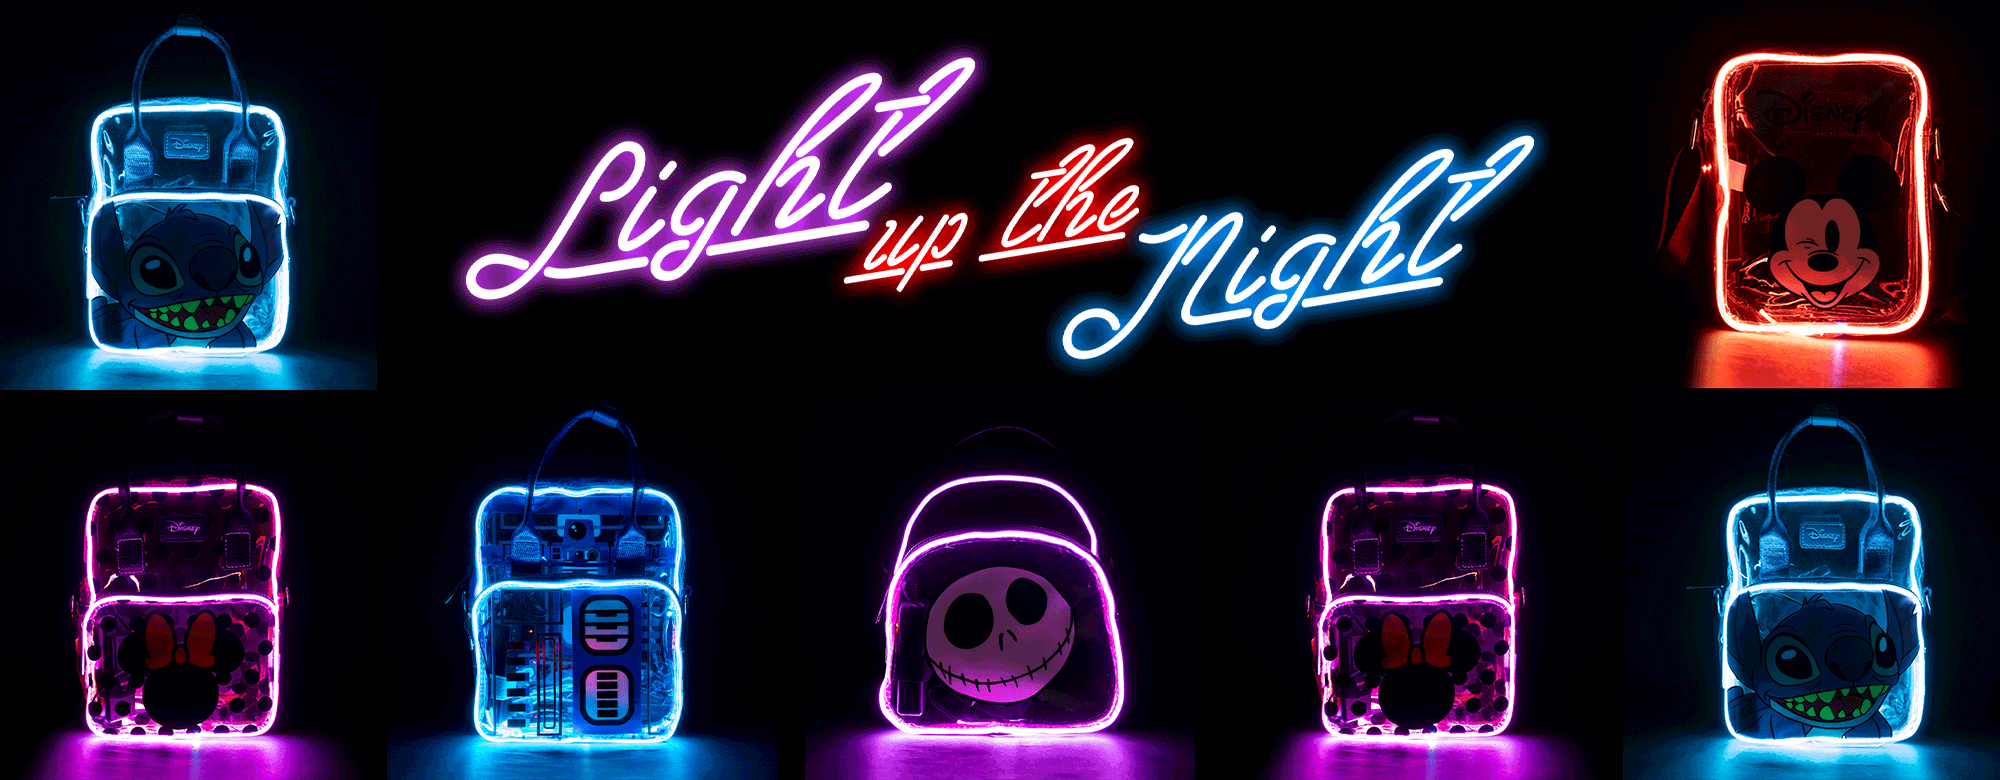 Banner Featuring Five New Light Up Bags